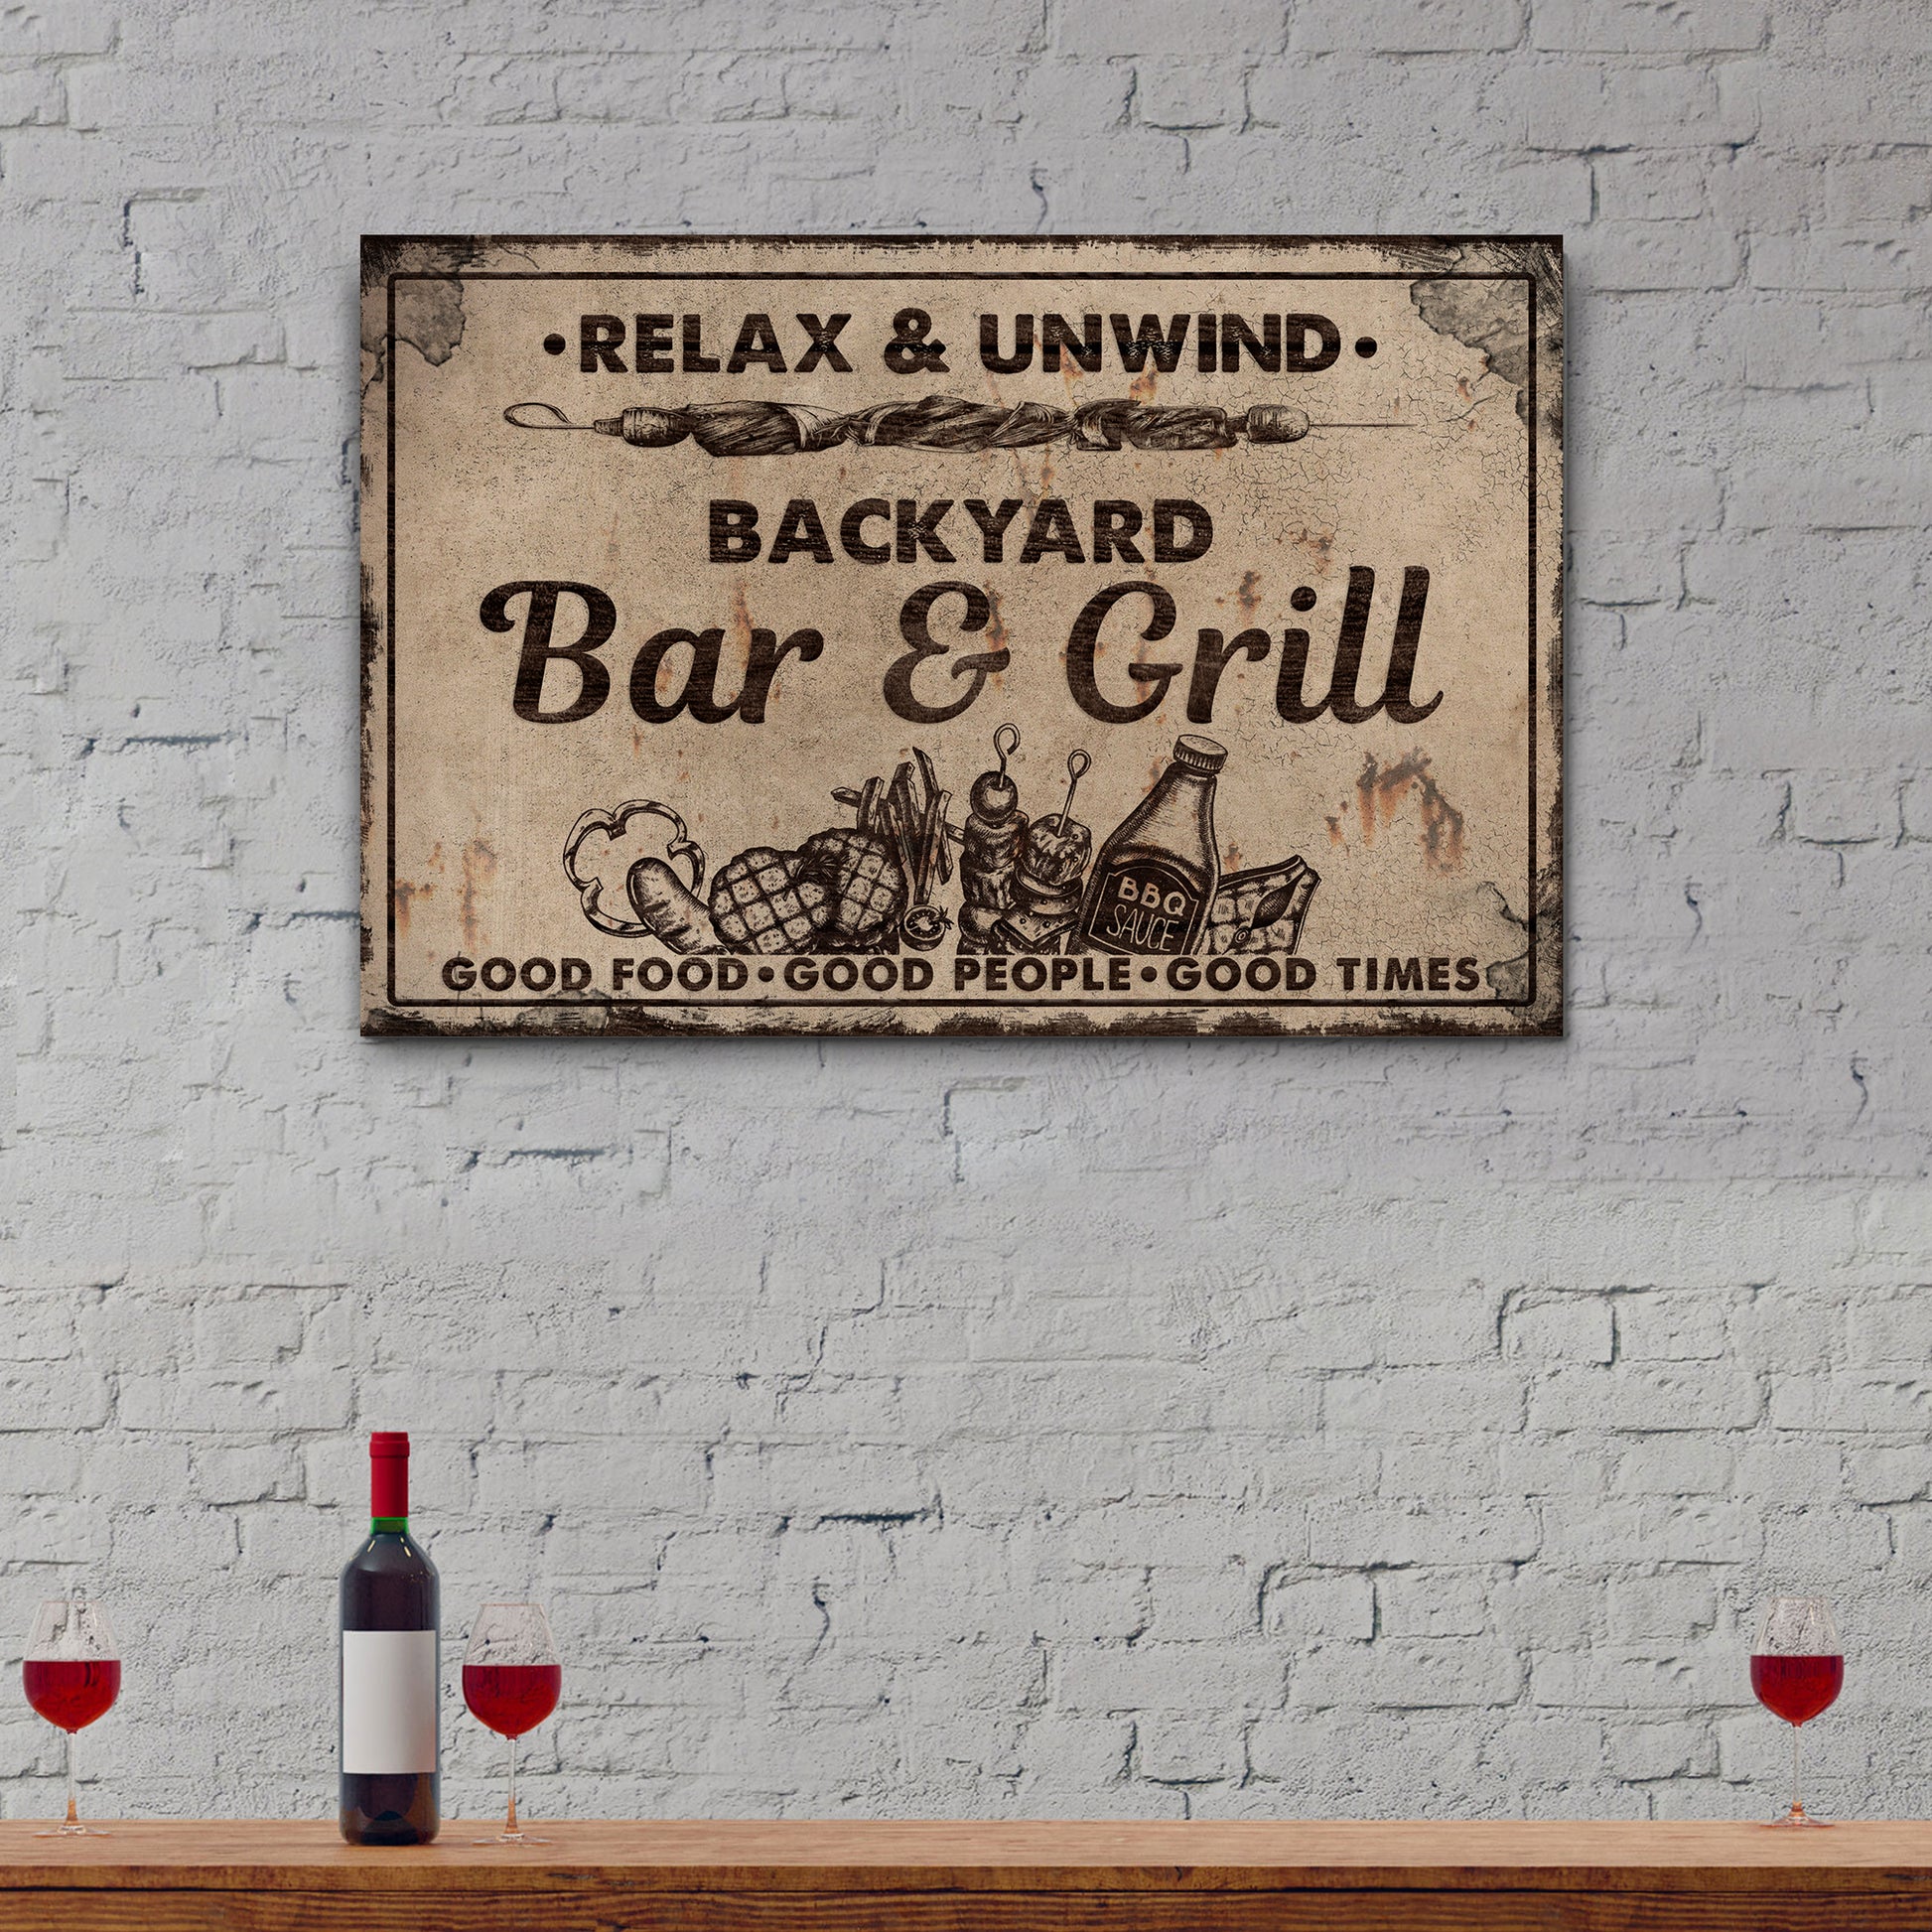 Backyard Bar And Grill Sign - Image by Tailored Canvases